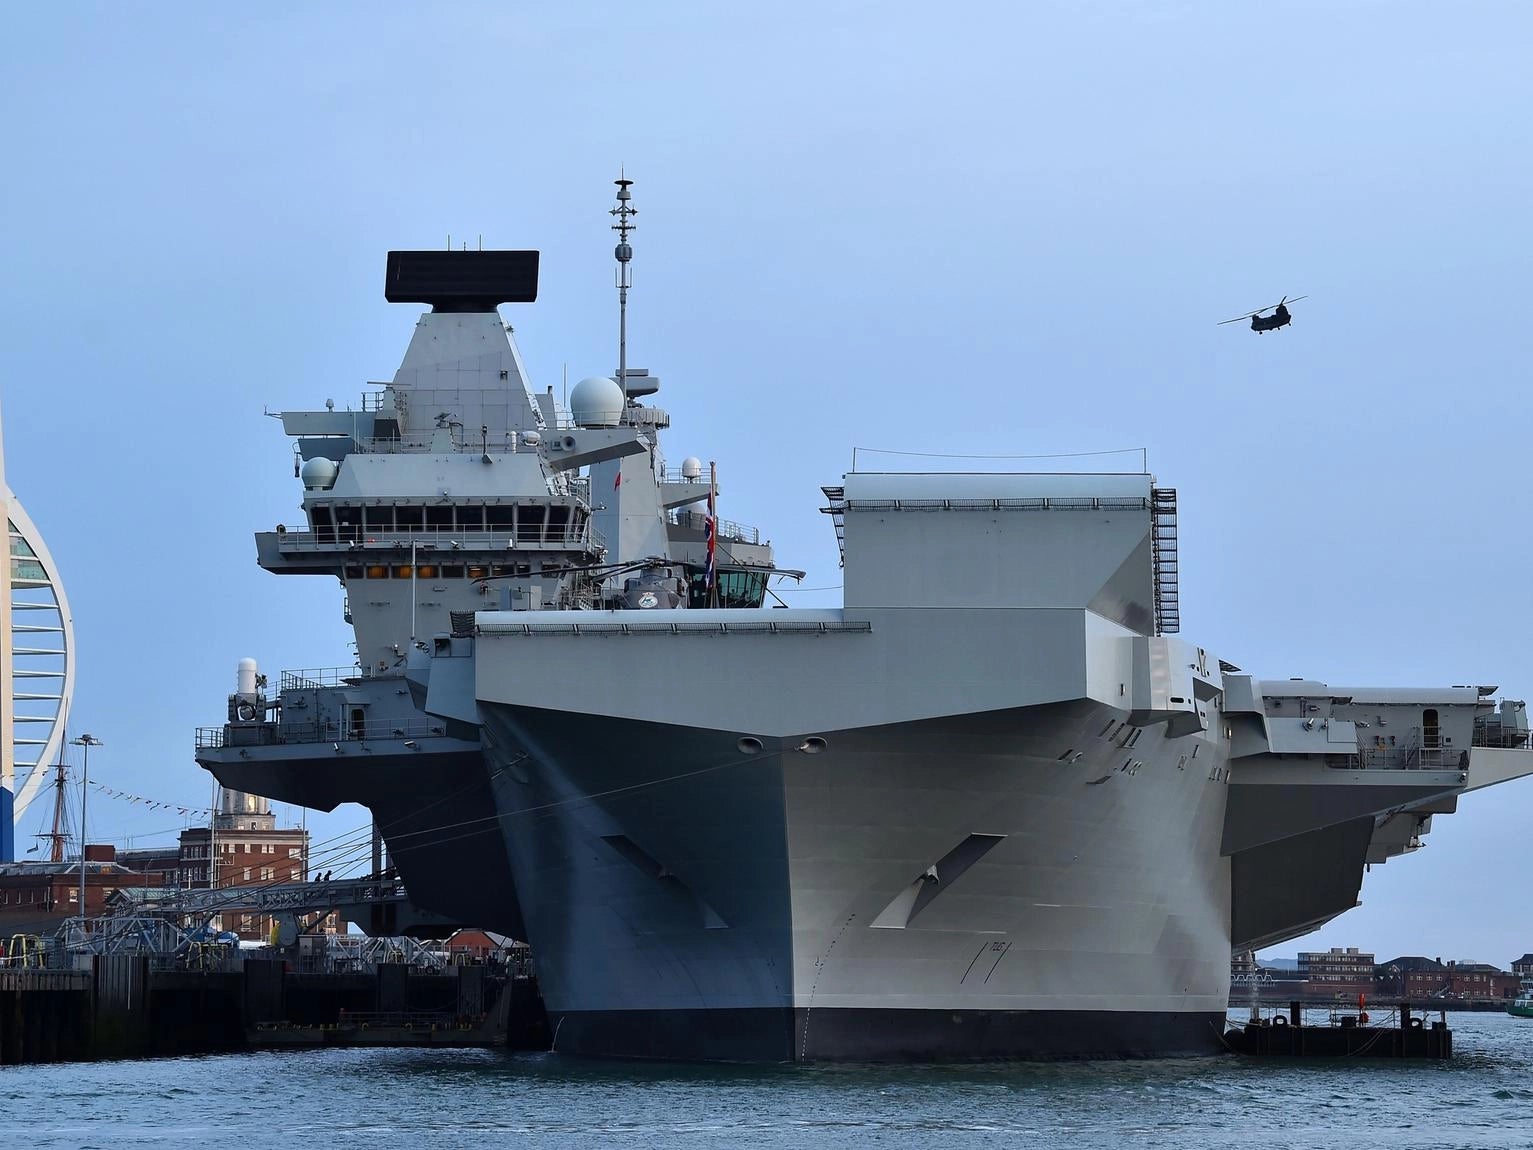 The British aircraft carrier HMS Queen Elizabeth at anchor